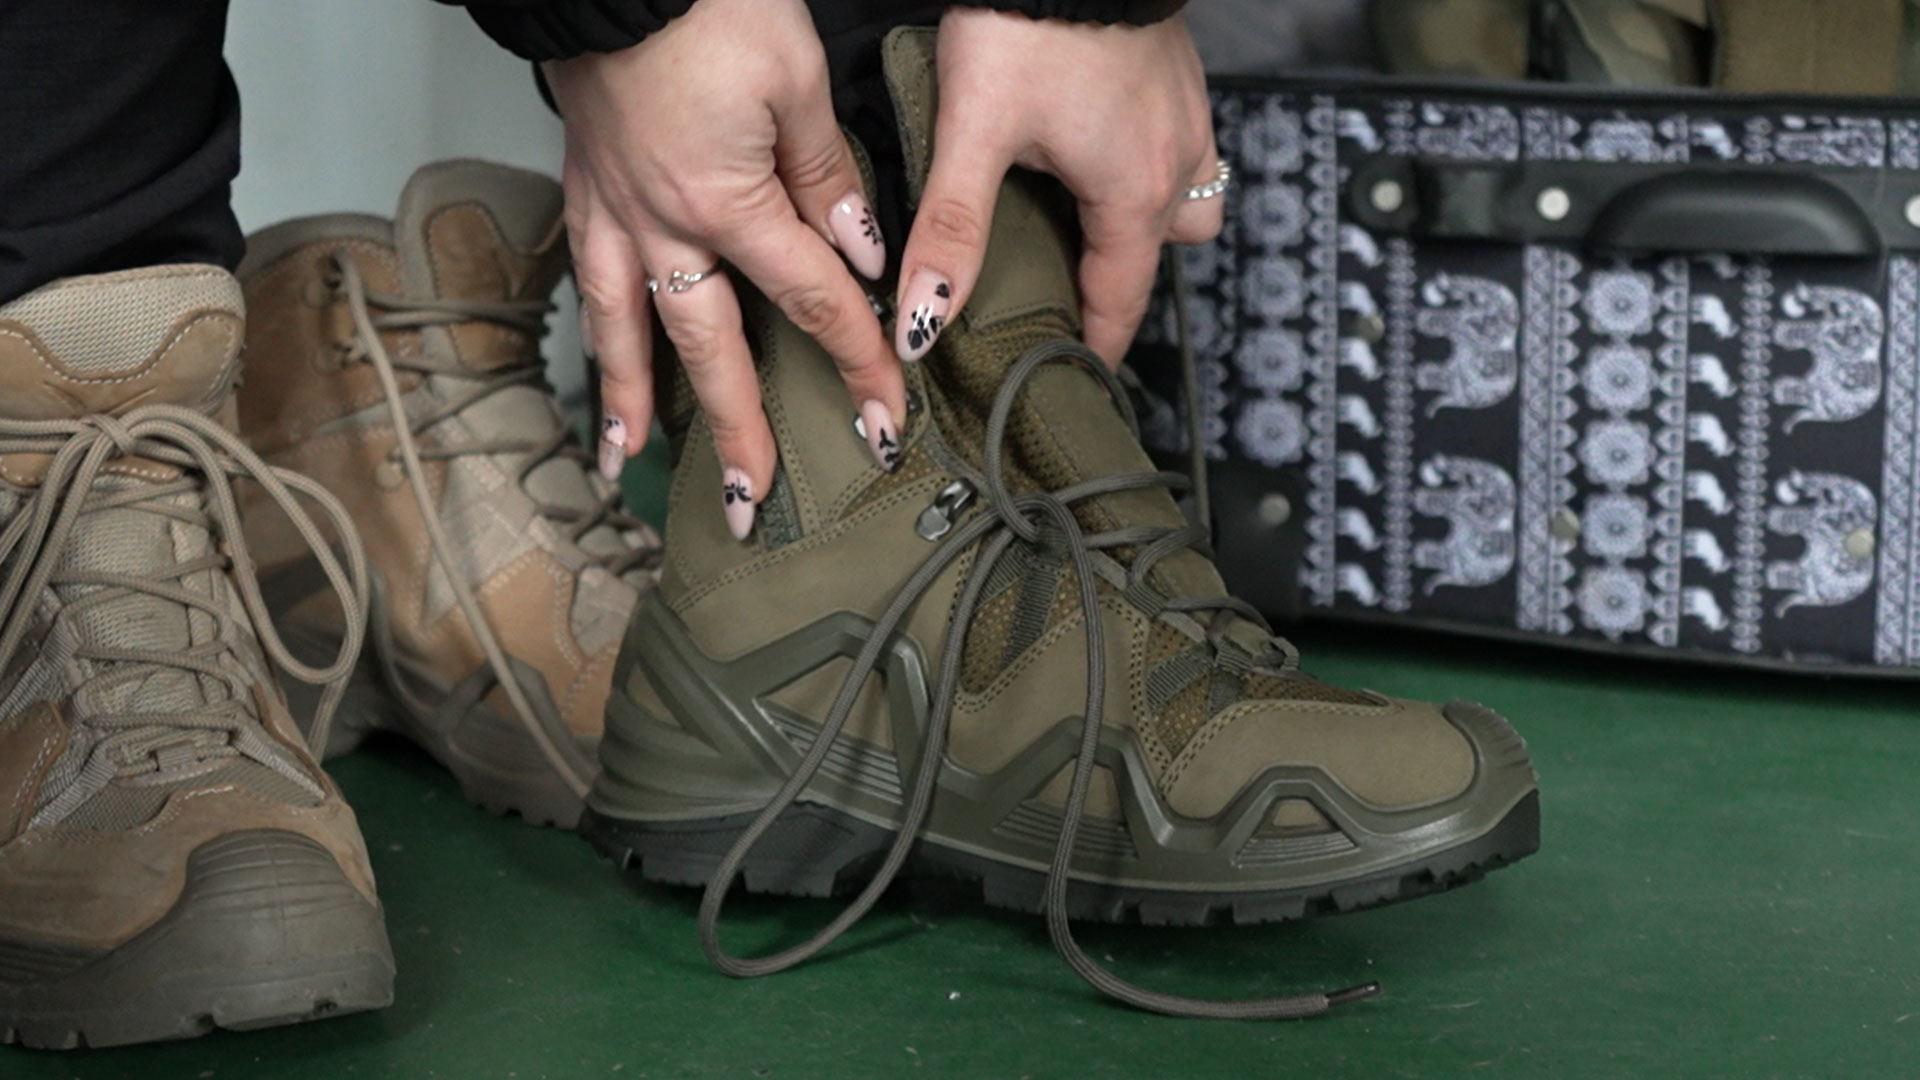 "I'm currently on leave and allowed myself designed nails for the first time in nine months," Roksolana tells CNN while she tries on her new military boots. 